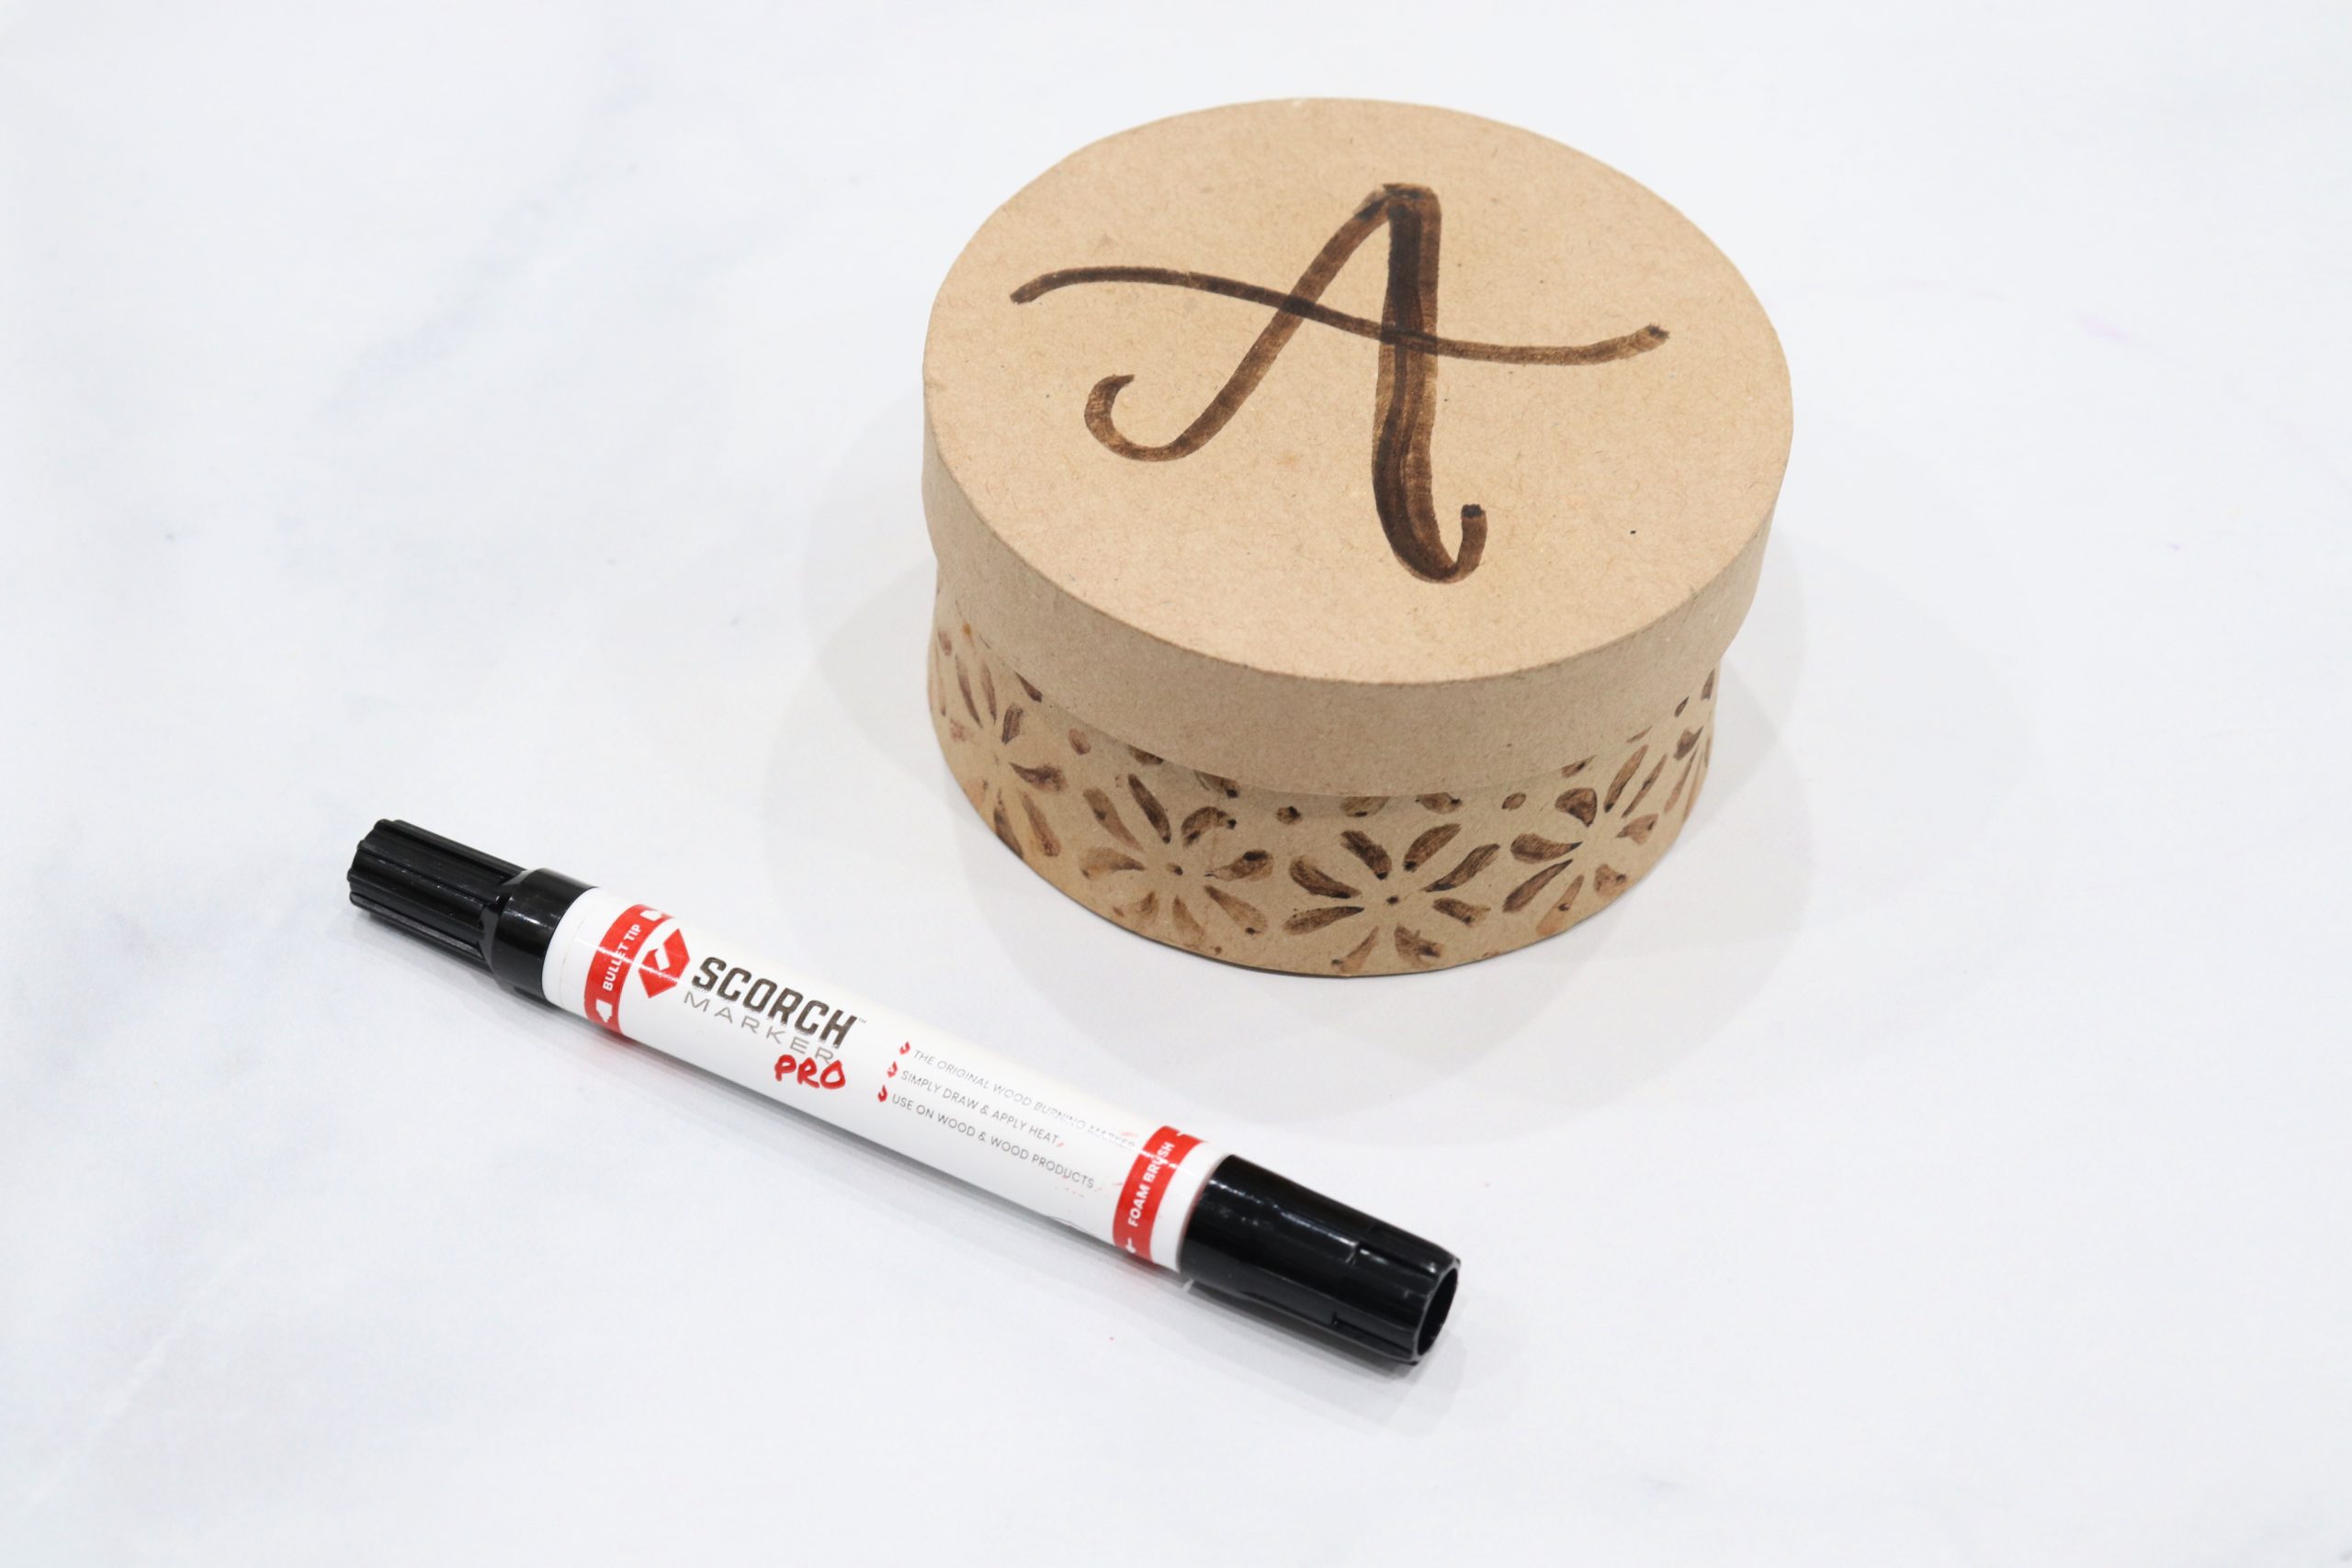 Scorch Marker Pro - Wood Burning Pen - for DIY Projects - 2 Tips Bullet tip  and Foam Brush